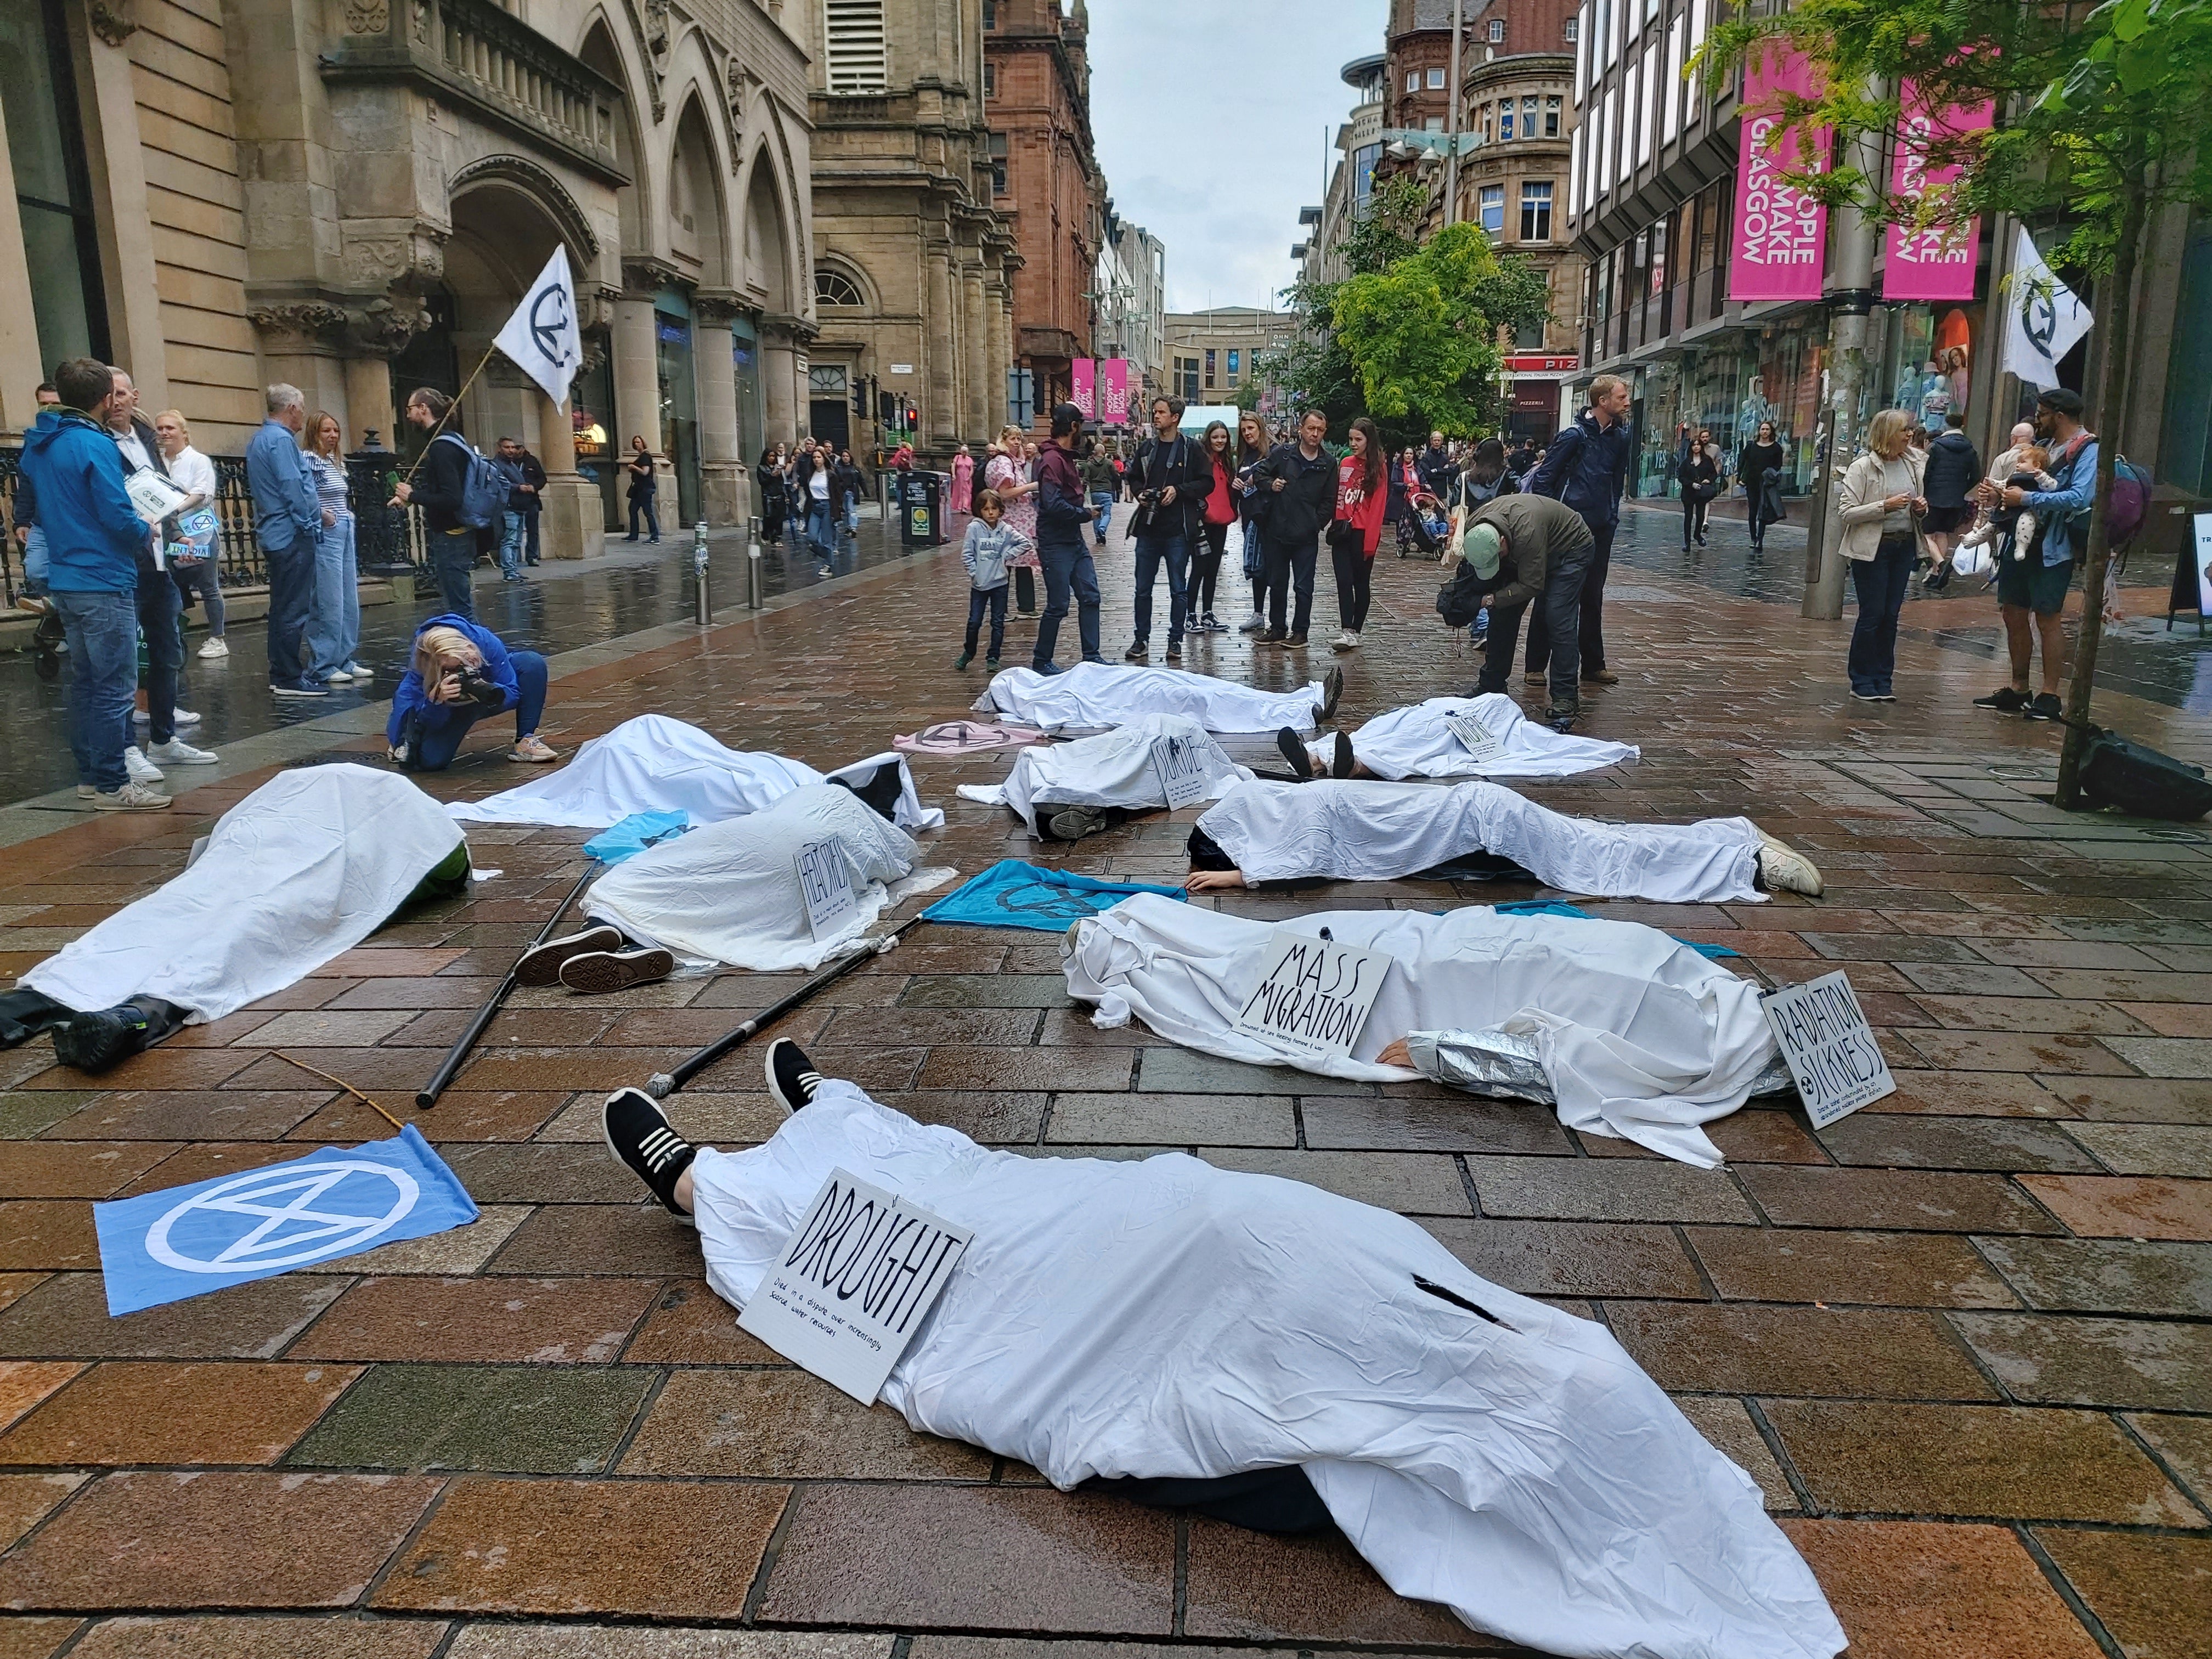 Climate activists stage die-in protest in Glasgow following record temperatures The Independent pic